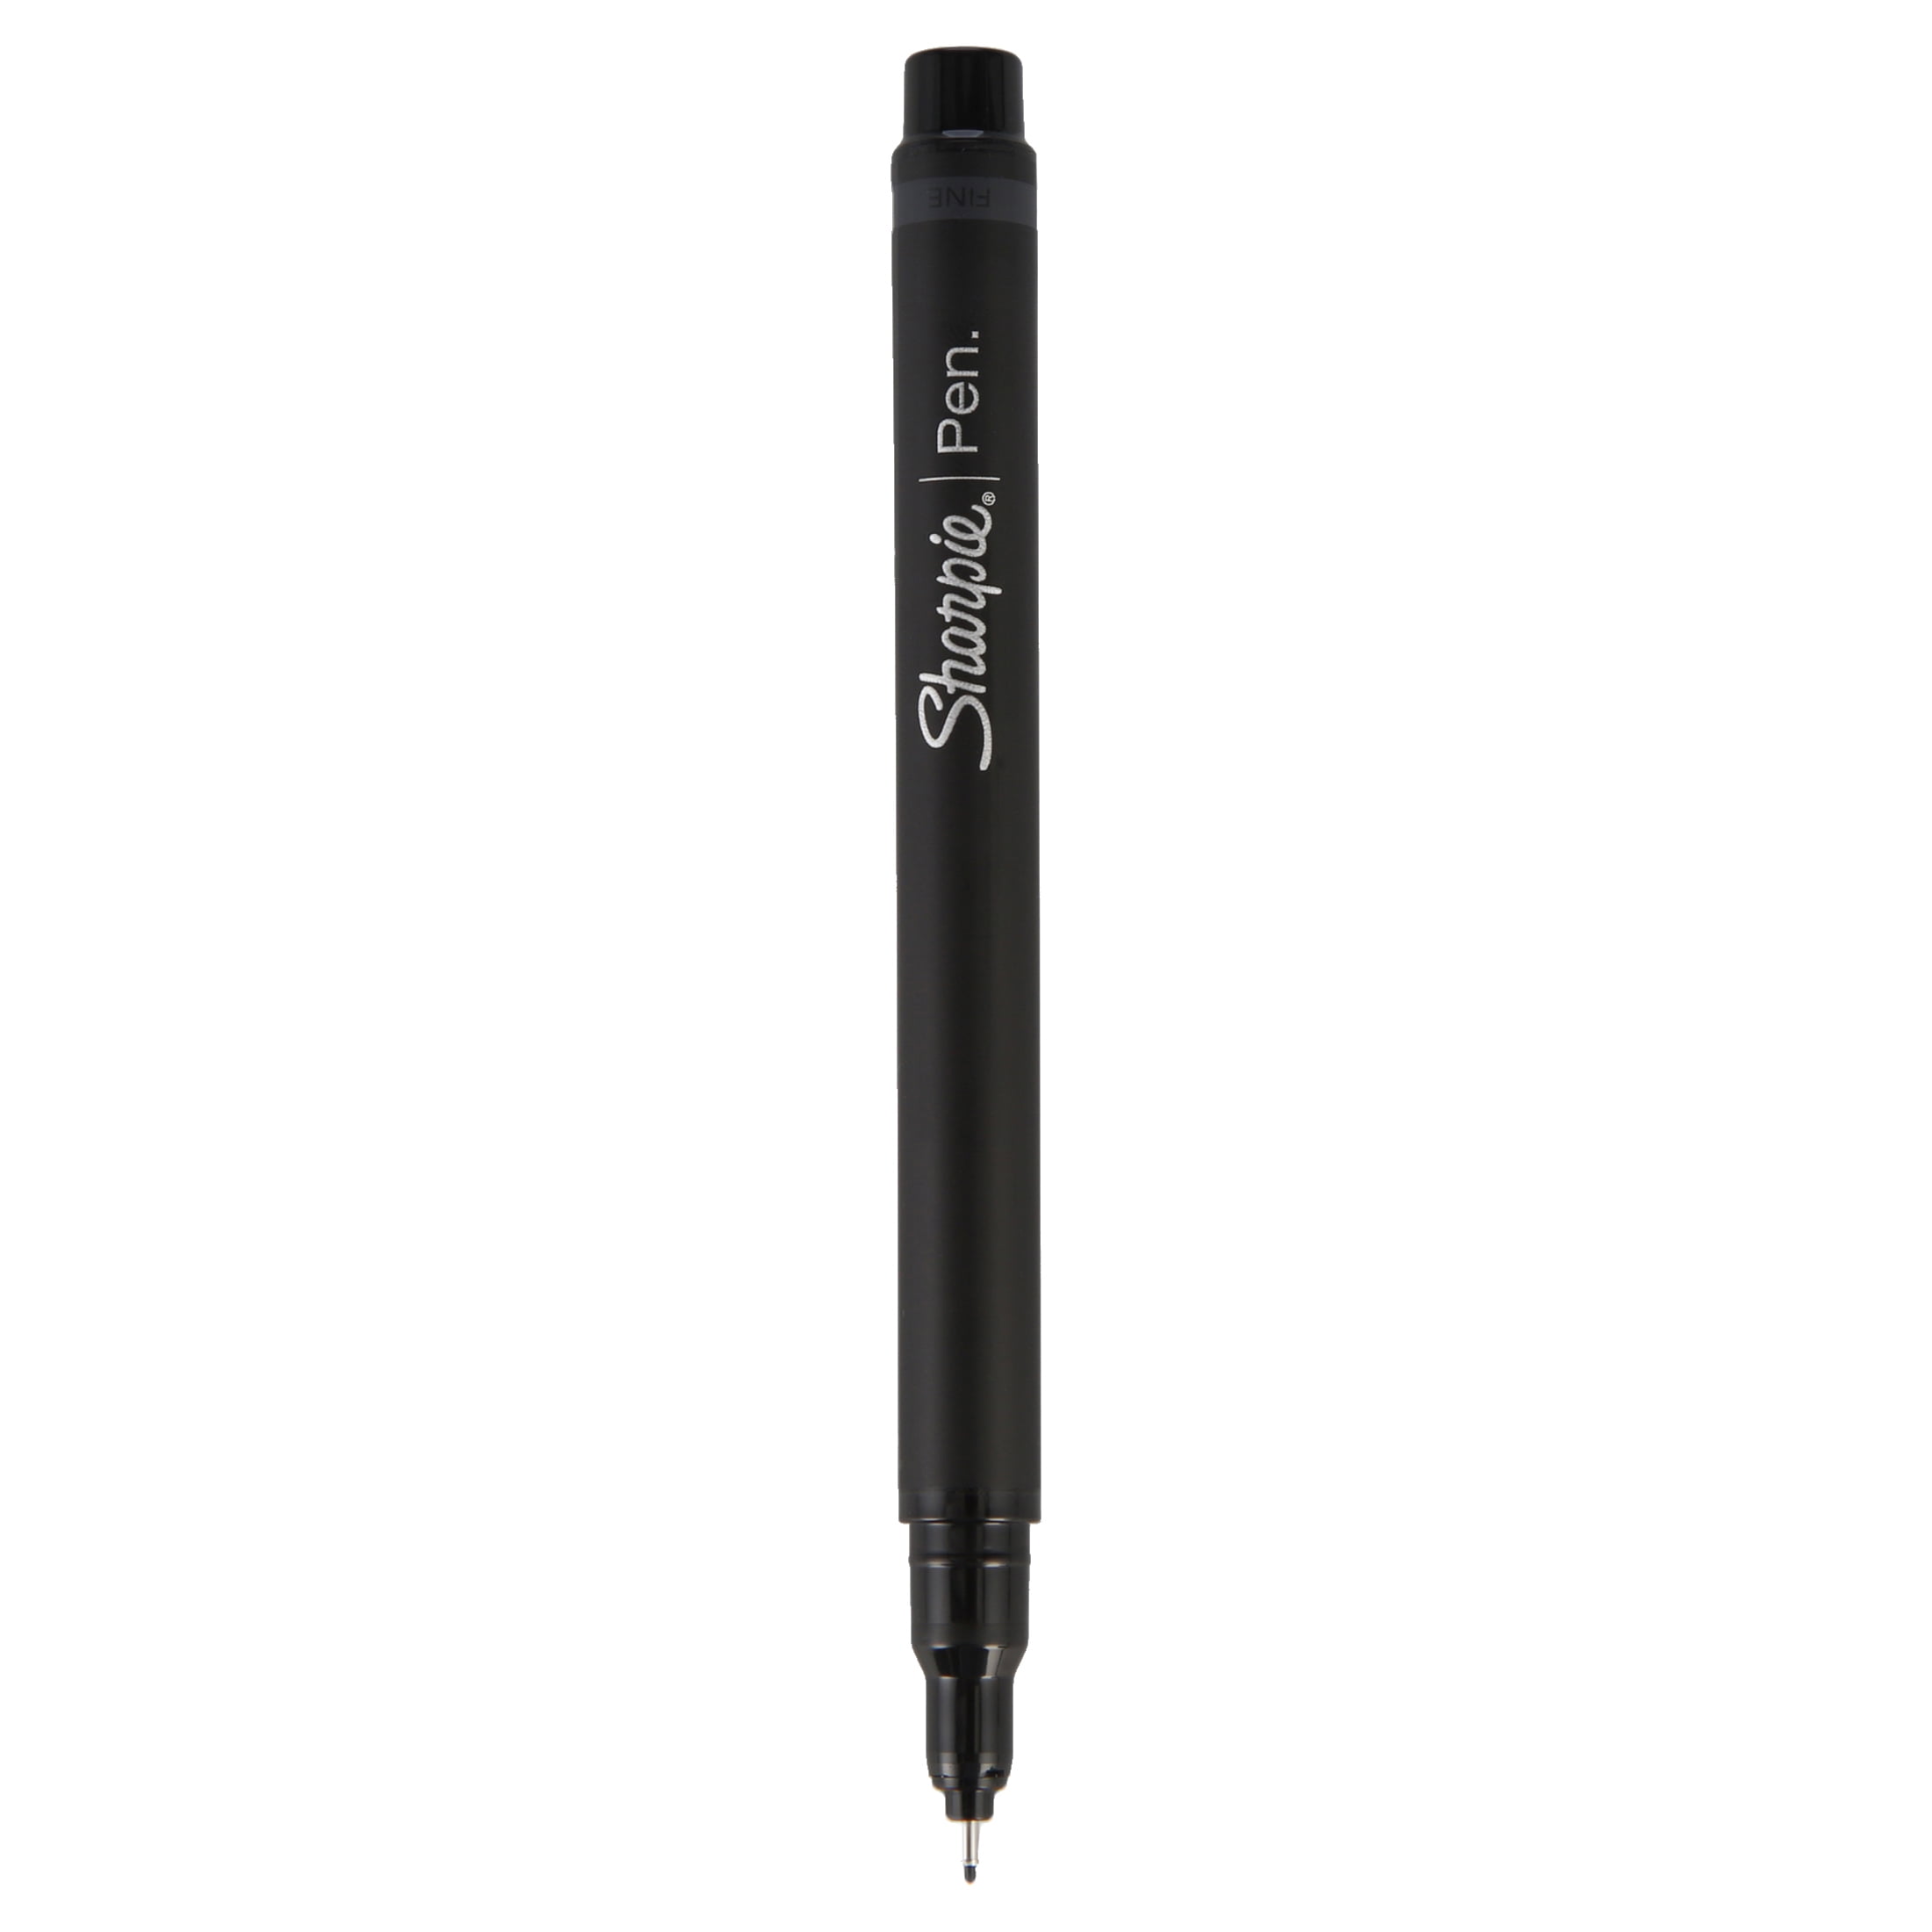 Sharpie Comfort-Grip No-Bleed Fine Point Pen - 2 Pack - Black, 2 Pack -  Dillons Food Stores